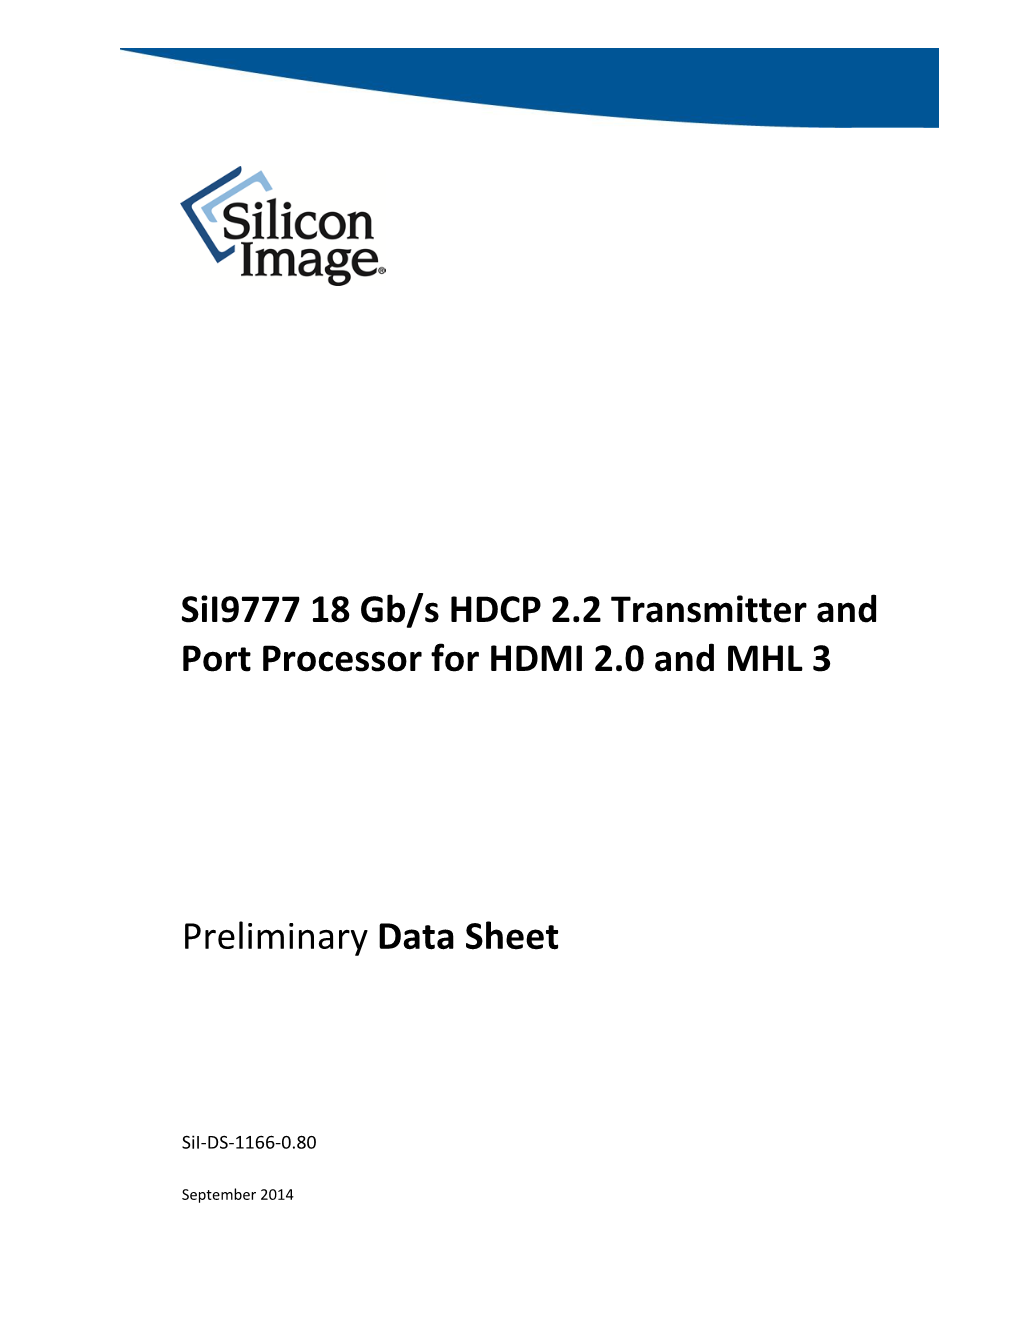 Sii9777 18 Gb/S HDCP 2.2 Transmitter and Port Processor for HDMI 2.0 and MHL 3